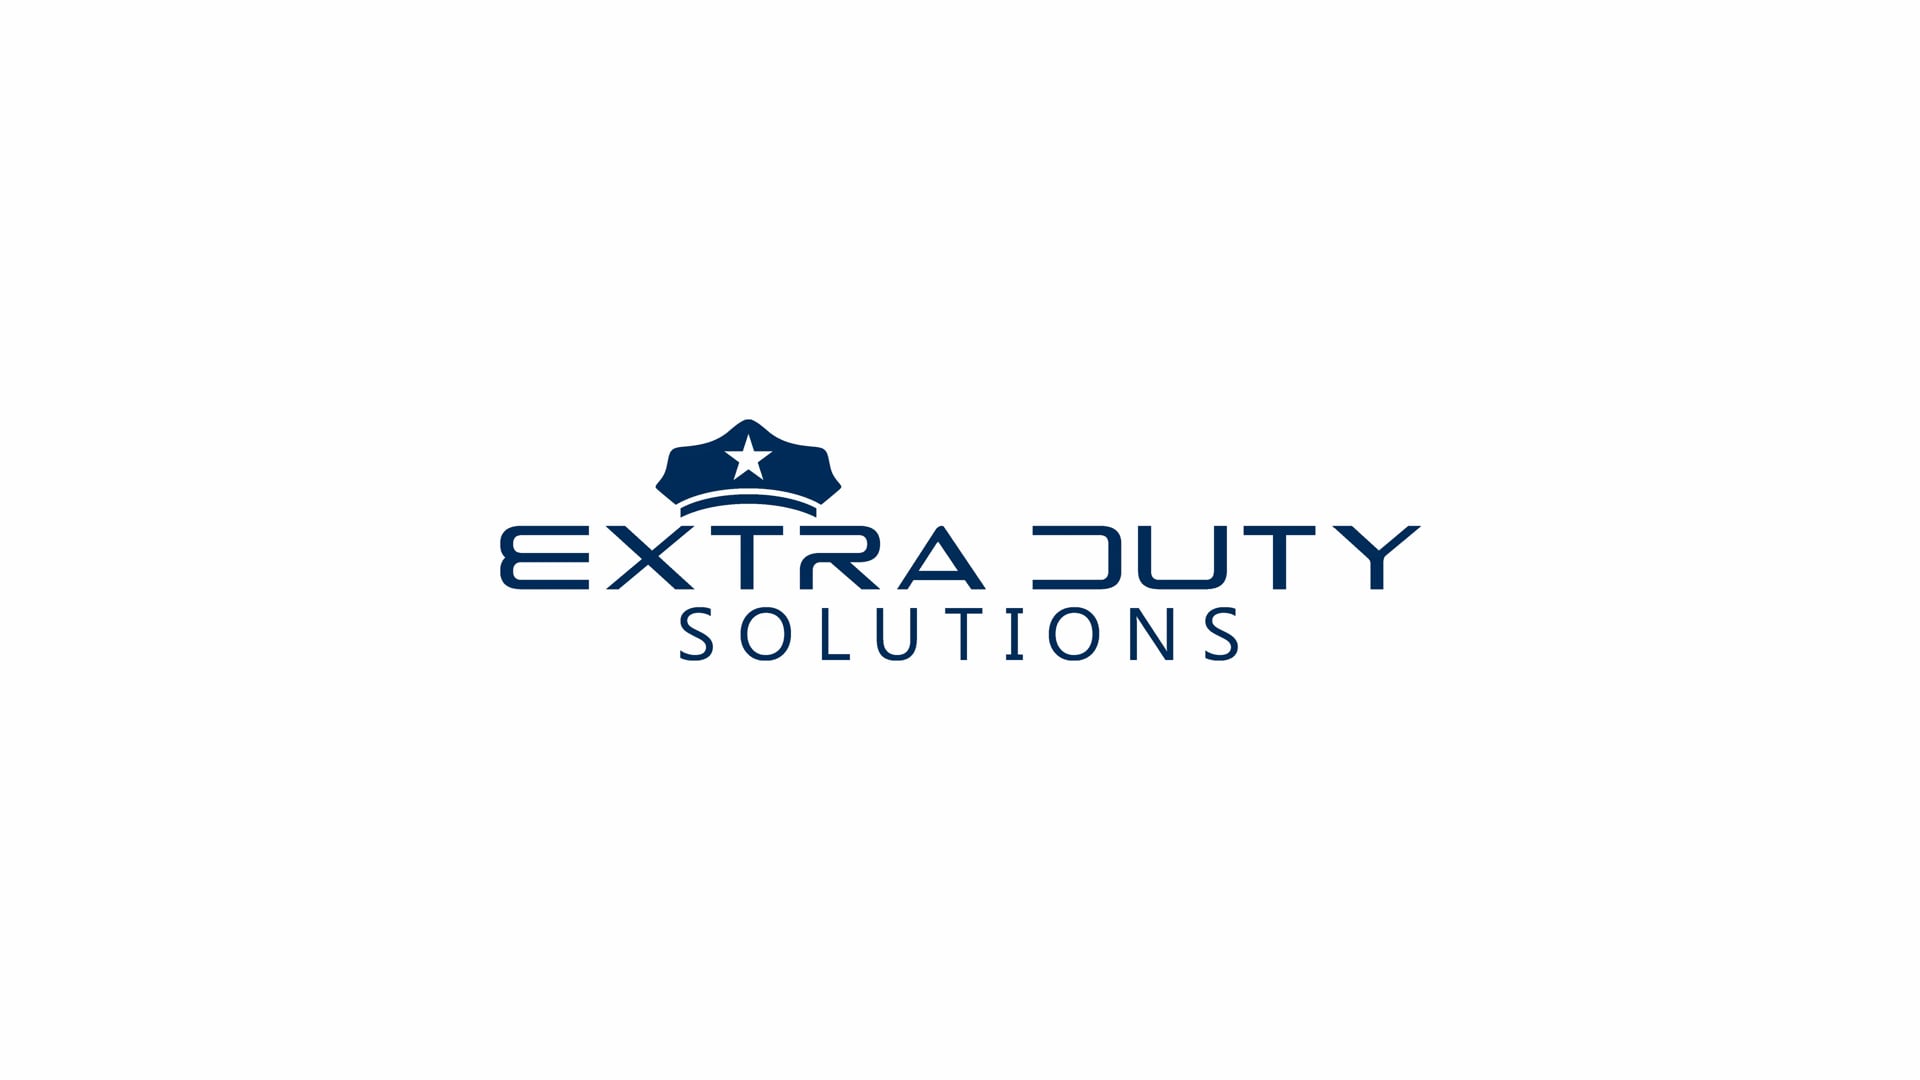 Extra Duty Solutions Conference Promo mov On Vimeo